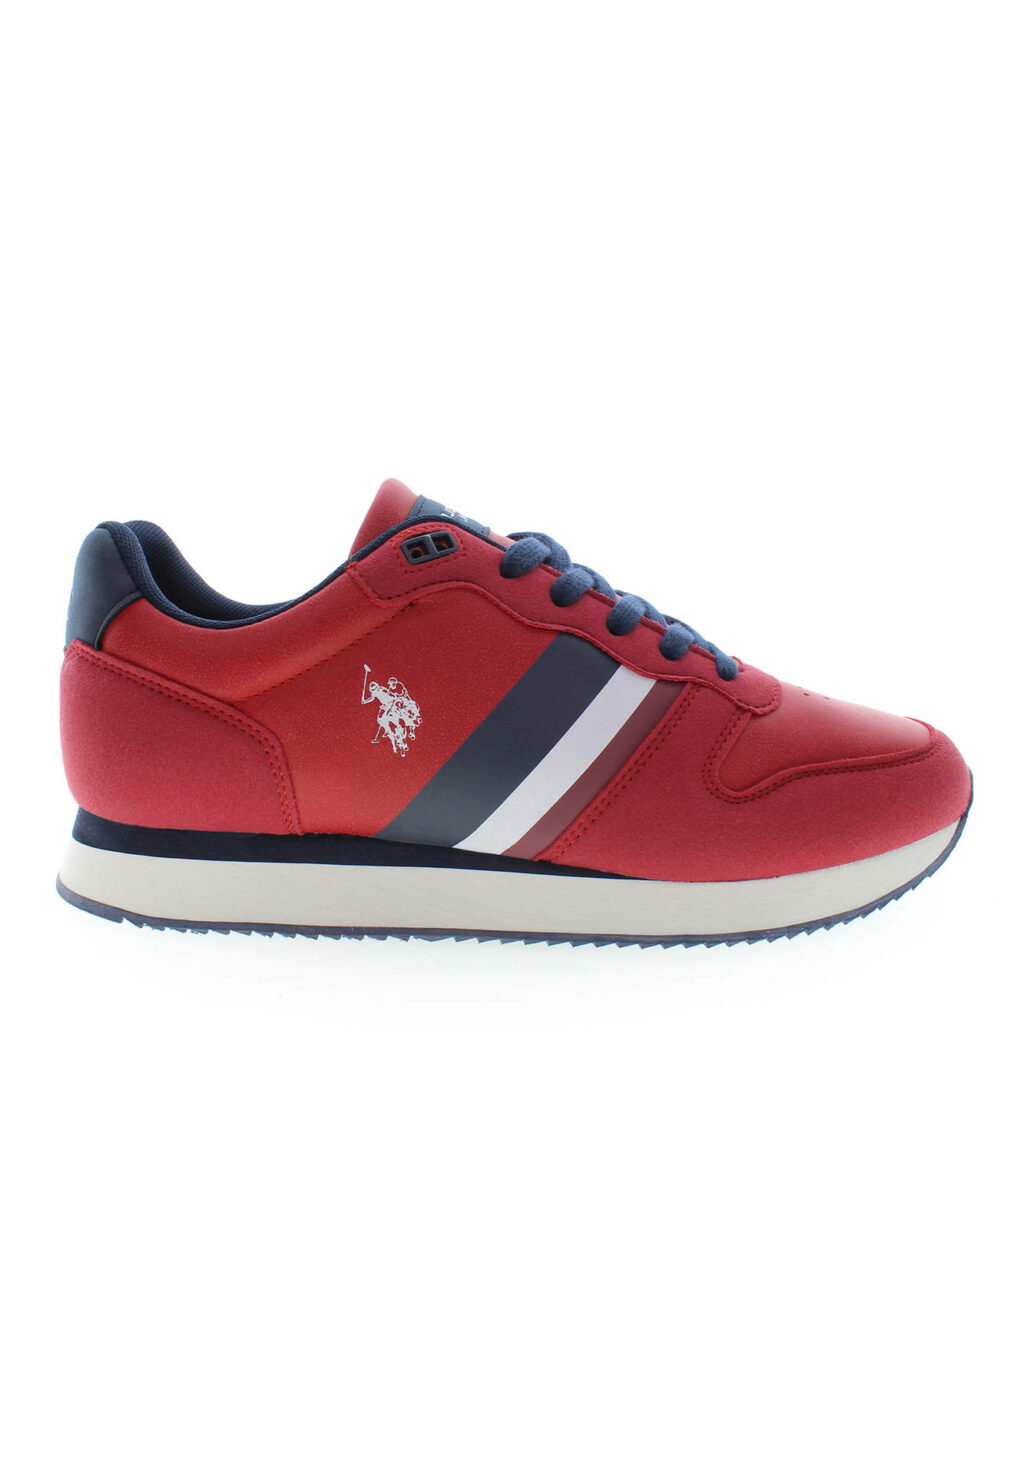 US POLO BEST PRICE MEN'S SPORTS SHOES RED NOBIL005MBYH1_ROSSO_RED001